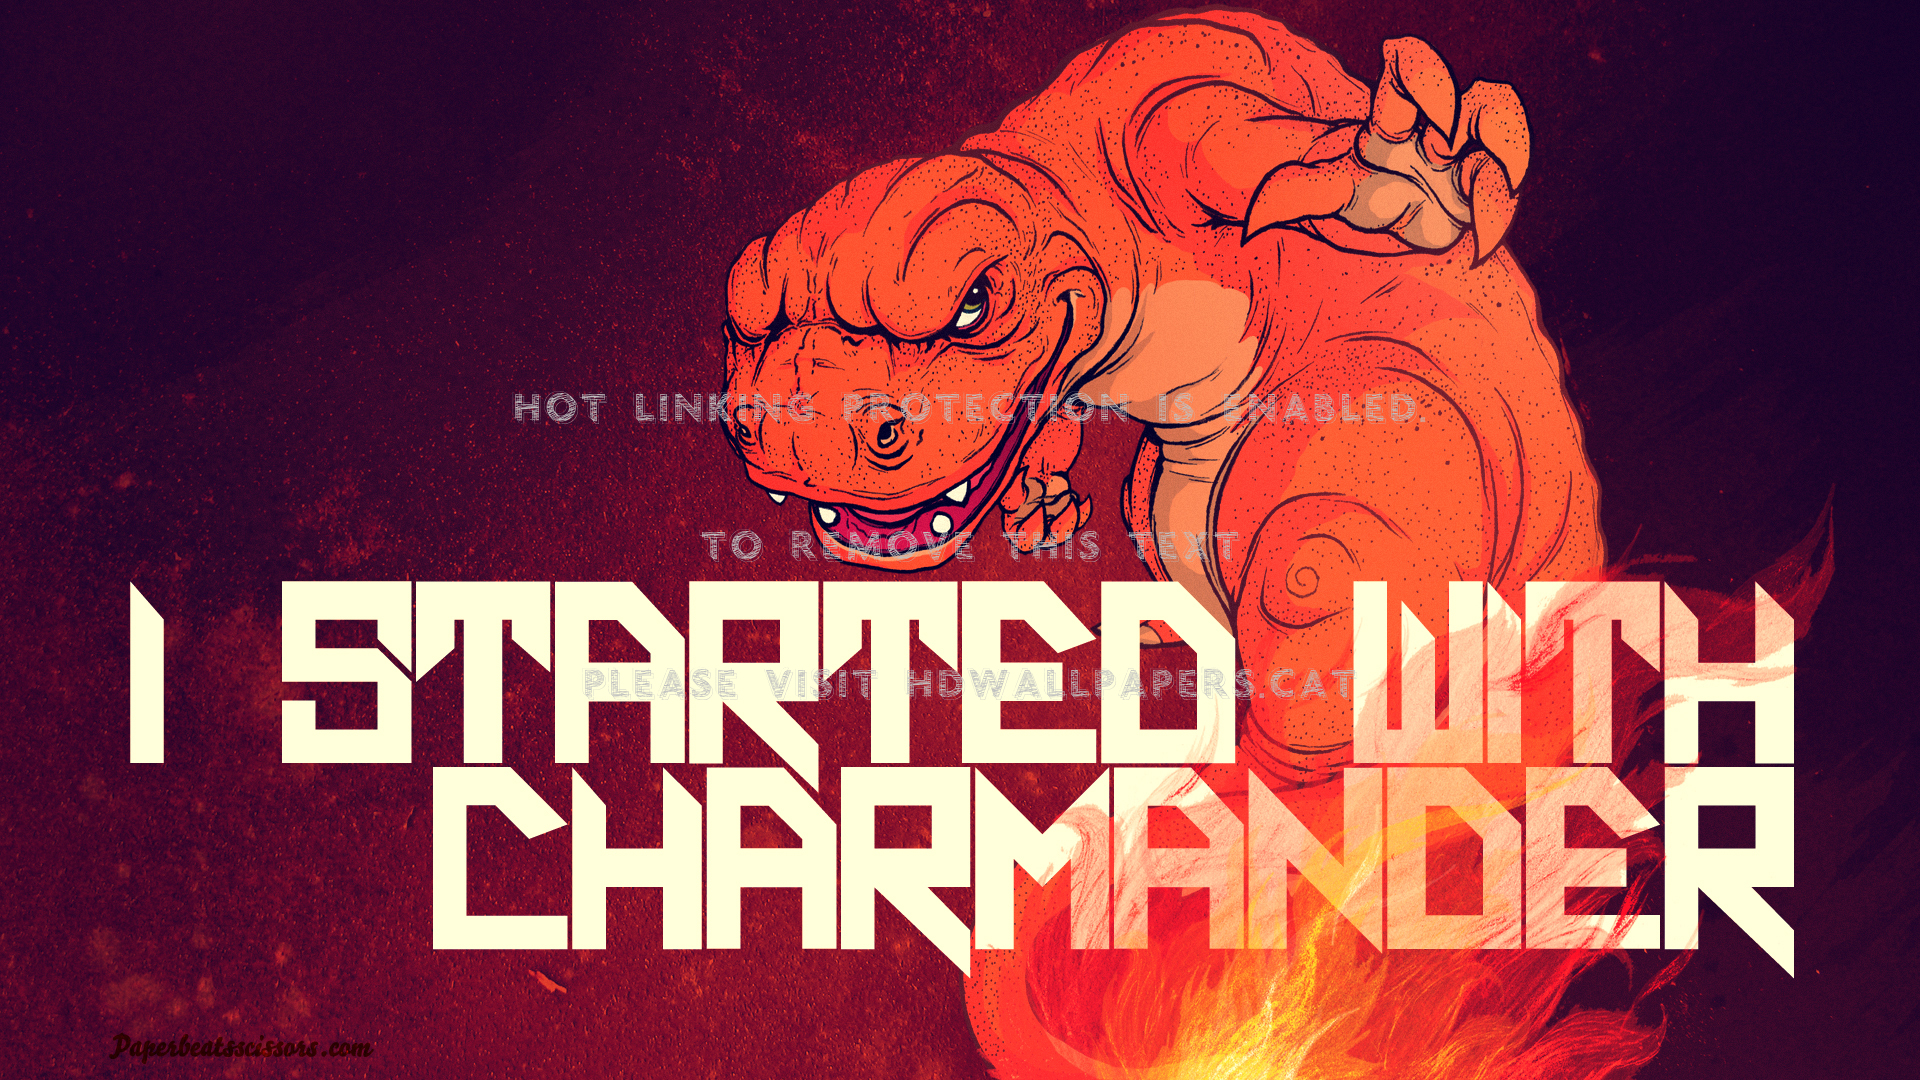 Charmander Red Cool Fire Pokemon Awesome - Started With Charmander - HD Wallpaper 